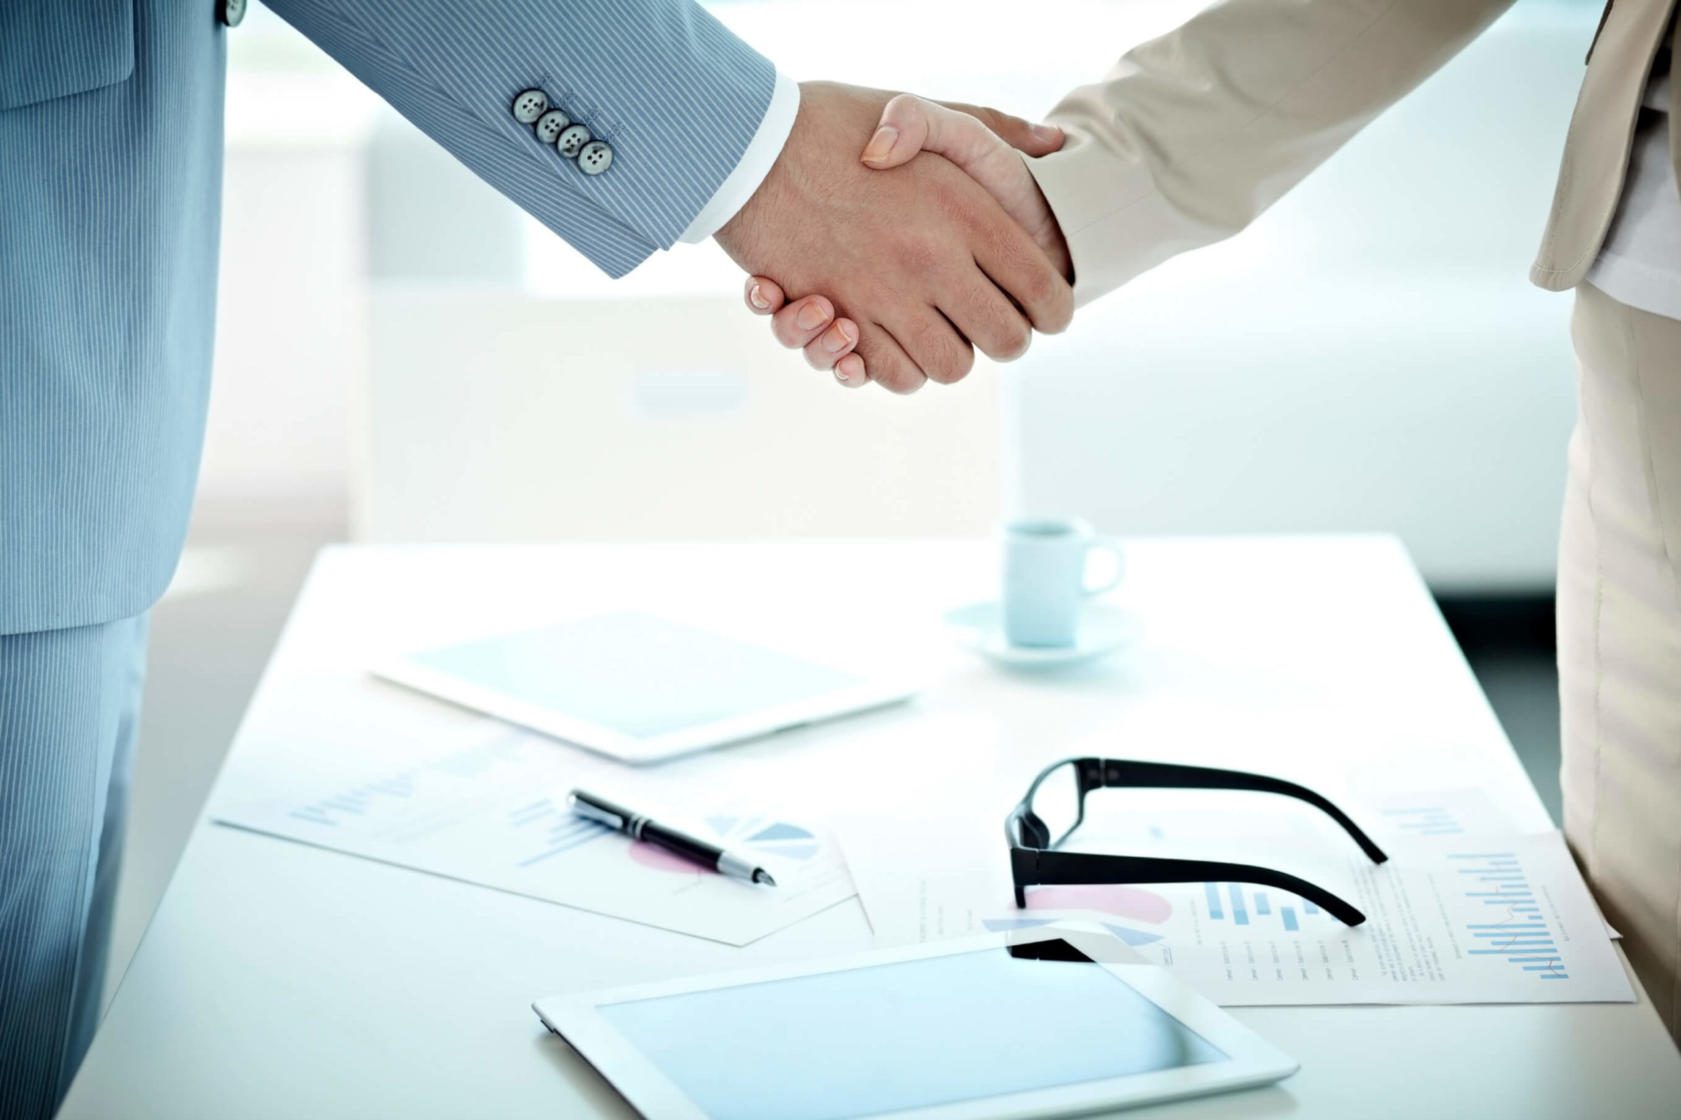 Person shaking hands with another person at a desk.